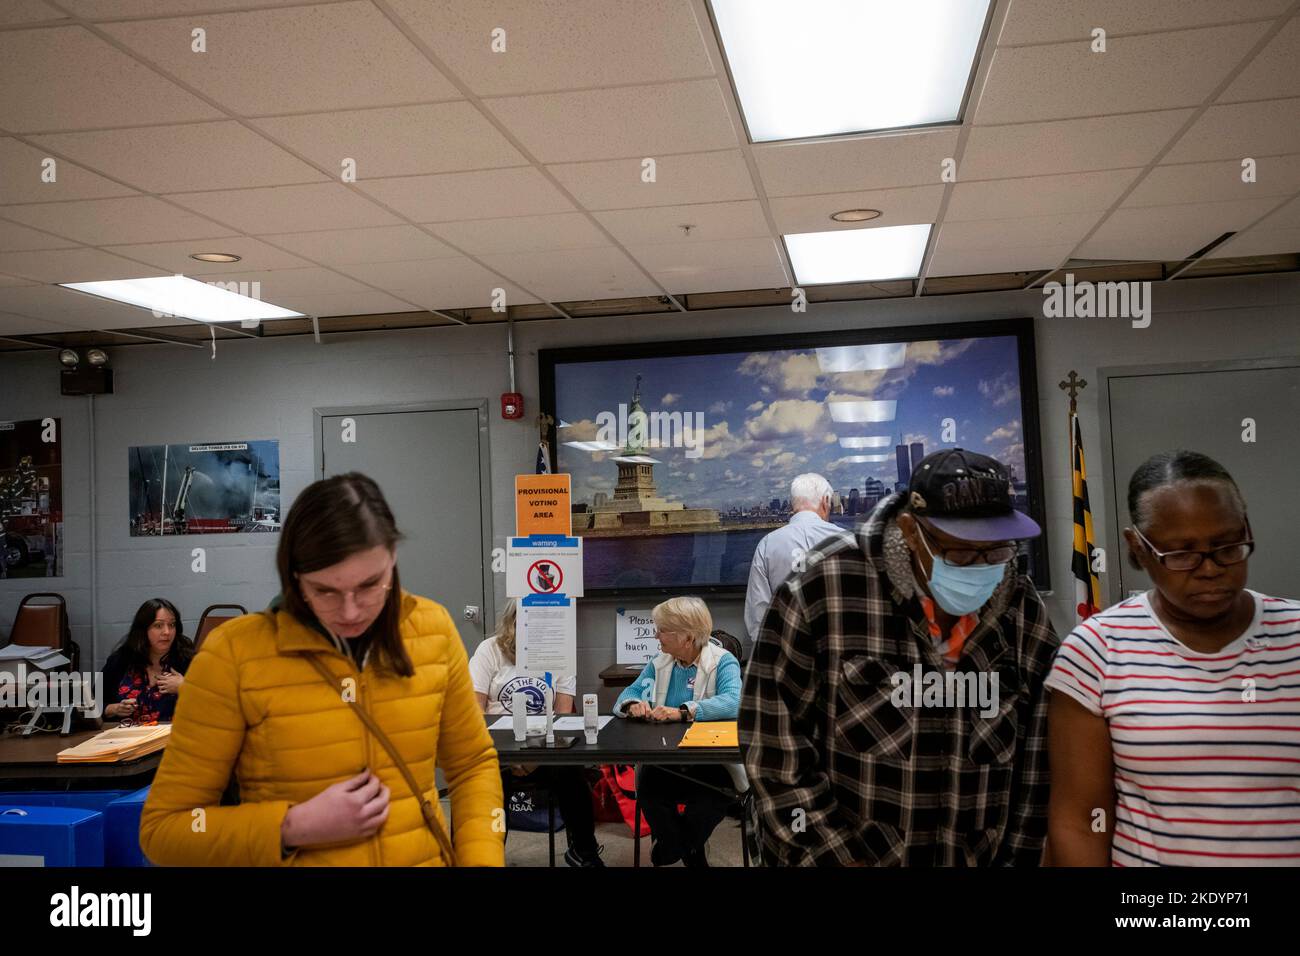 As Americans head to the polls to vote in the 2022 Midterm Elections, voters arrive at the Eastport Volunteer Fire Company in Annapolis, Maryland, Tuesday, November 8, 2022. Credit: Rod Lamkey/CNP /MediaPunch Stock Photo